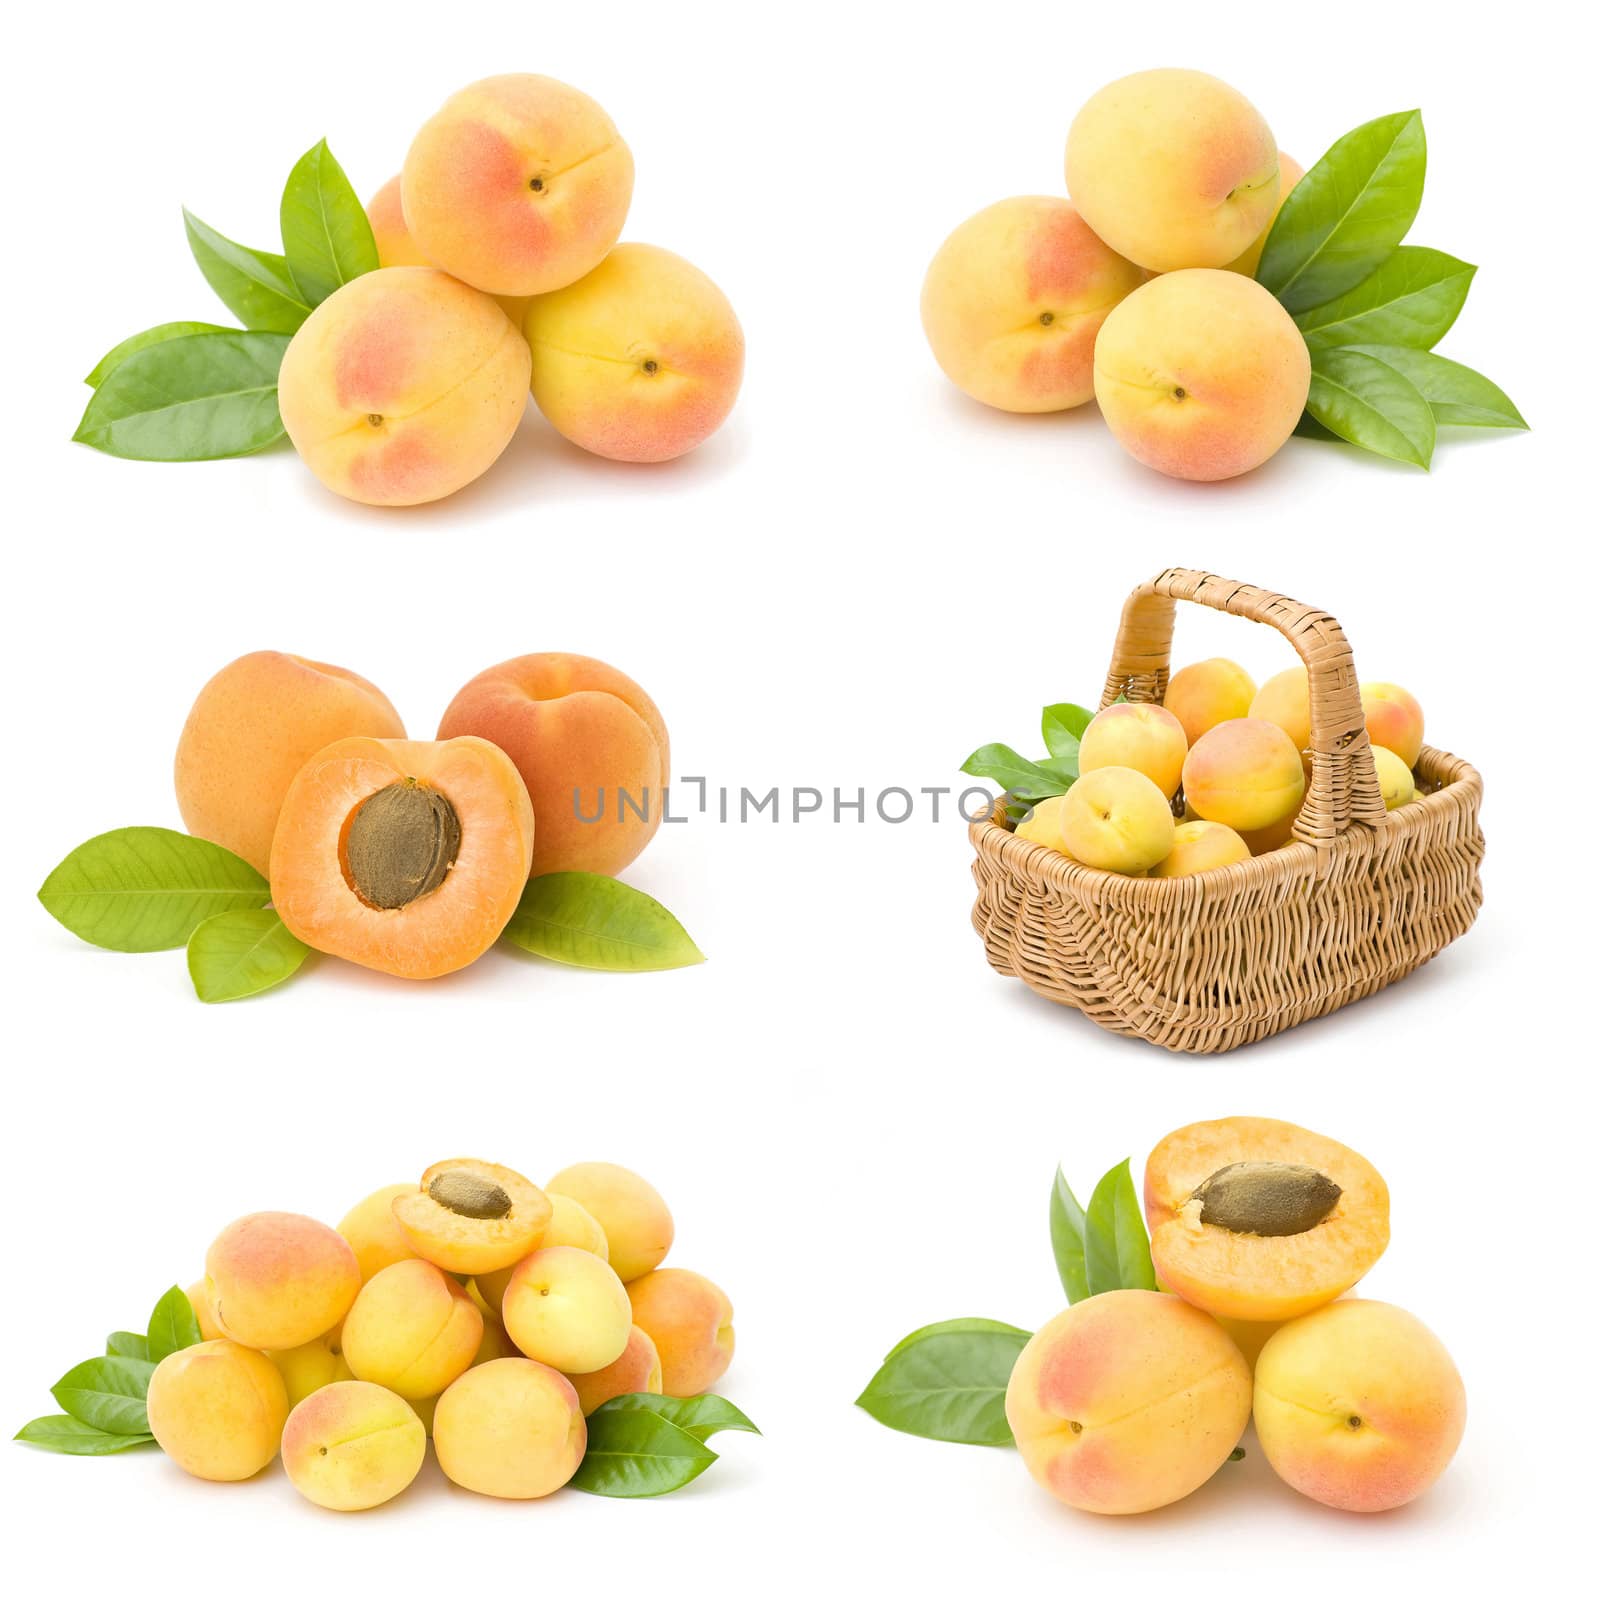 collection of fresh apricot fruits